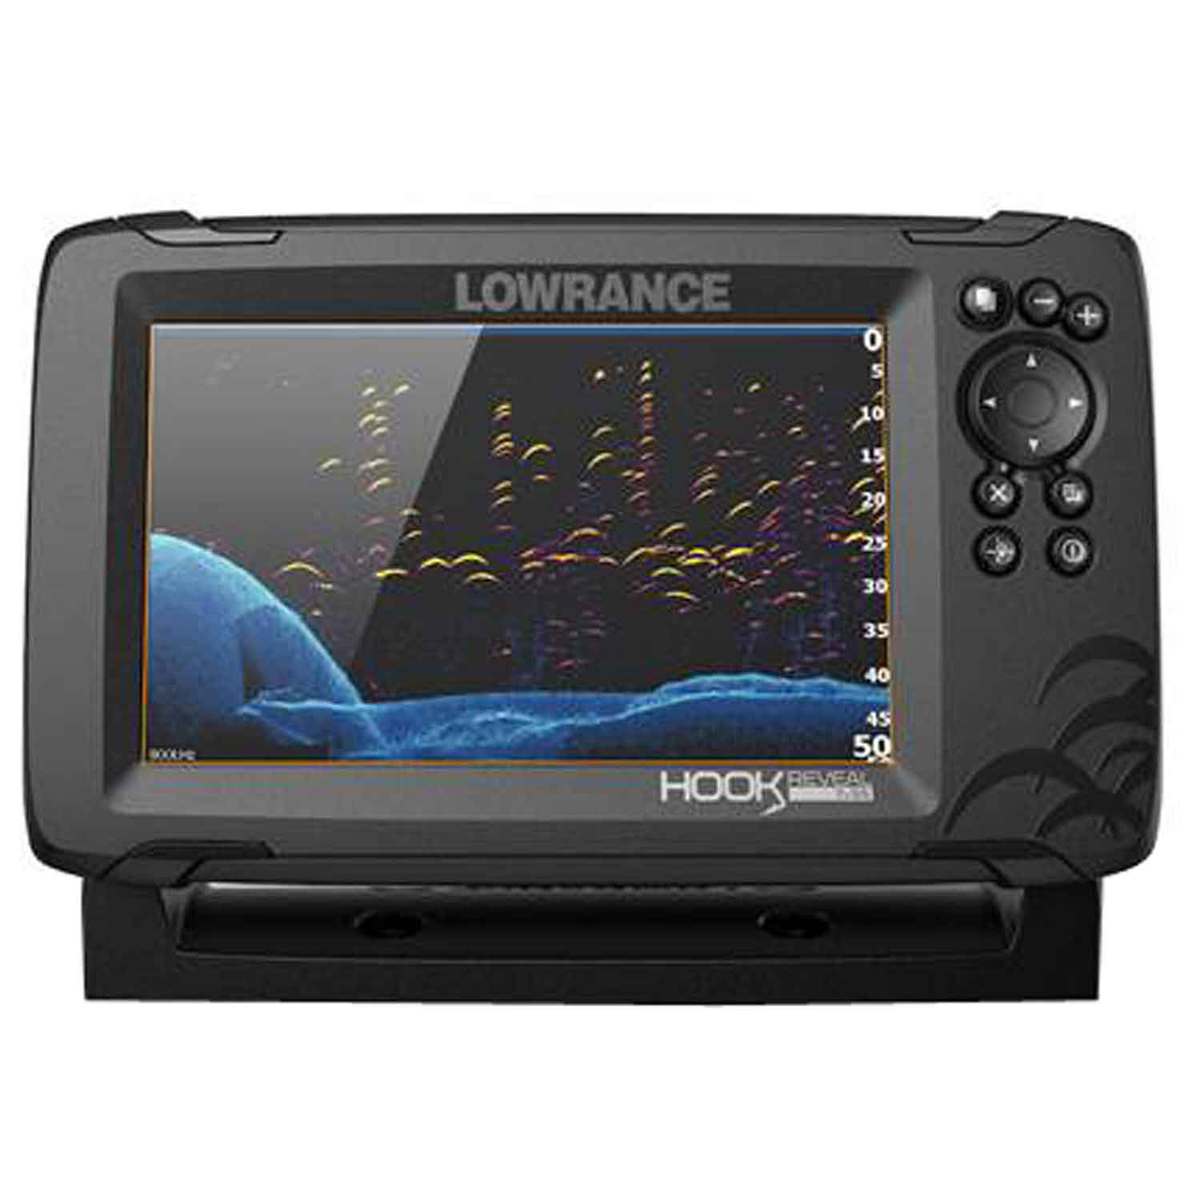 Lowrance HOOK 7X Fish Finder - CHIRP, DownScan, GPS Plotter |